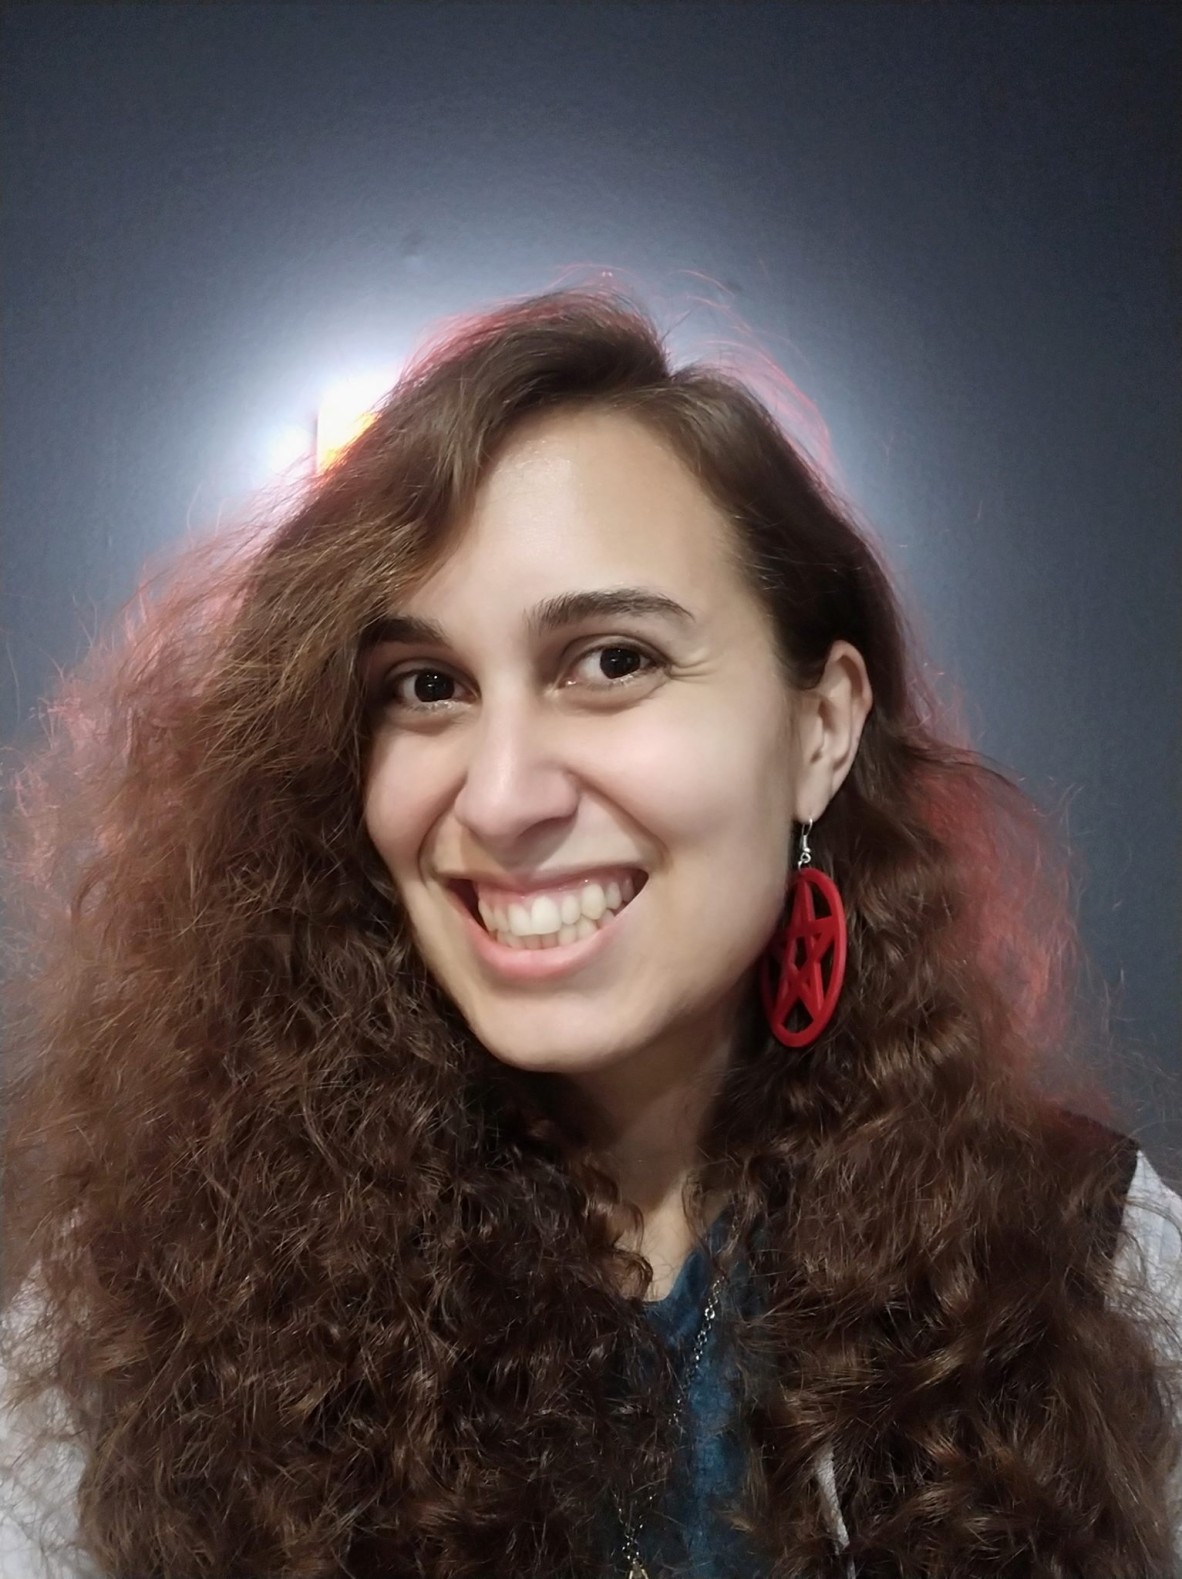 A photograph of writer Allanah Hunt who has wavy brown hair haloed by soft lighting and wears red pentagram earrings